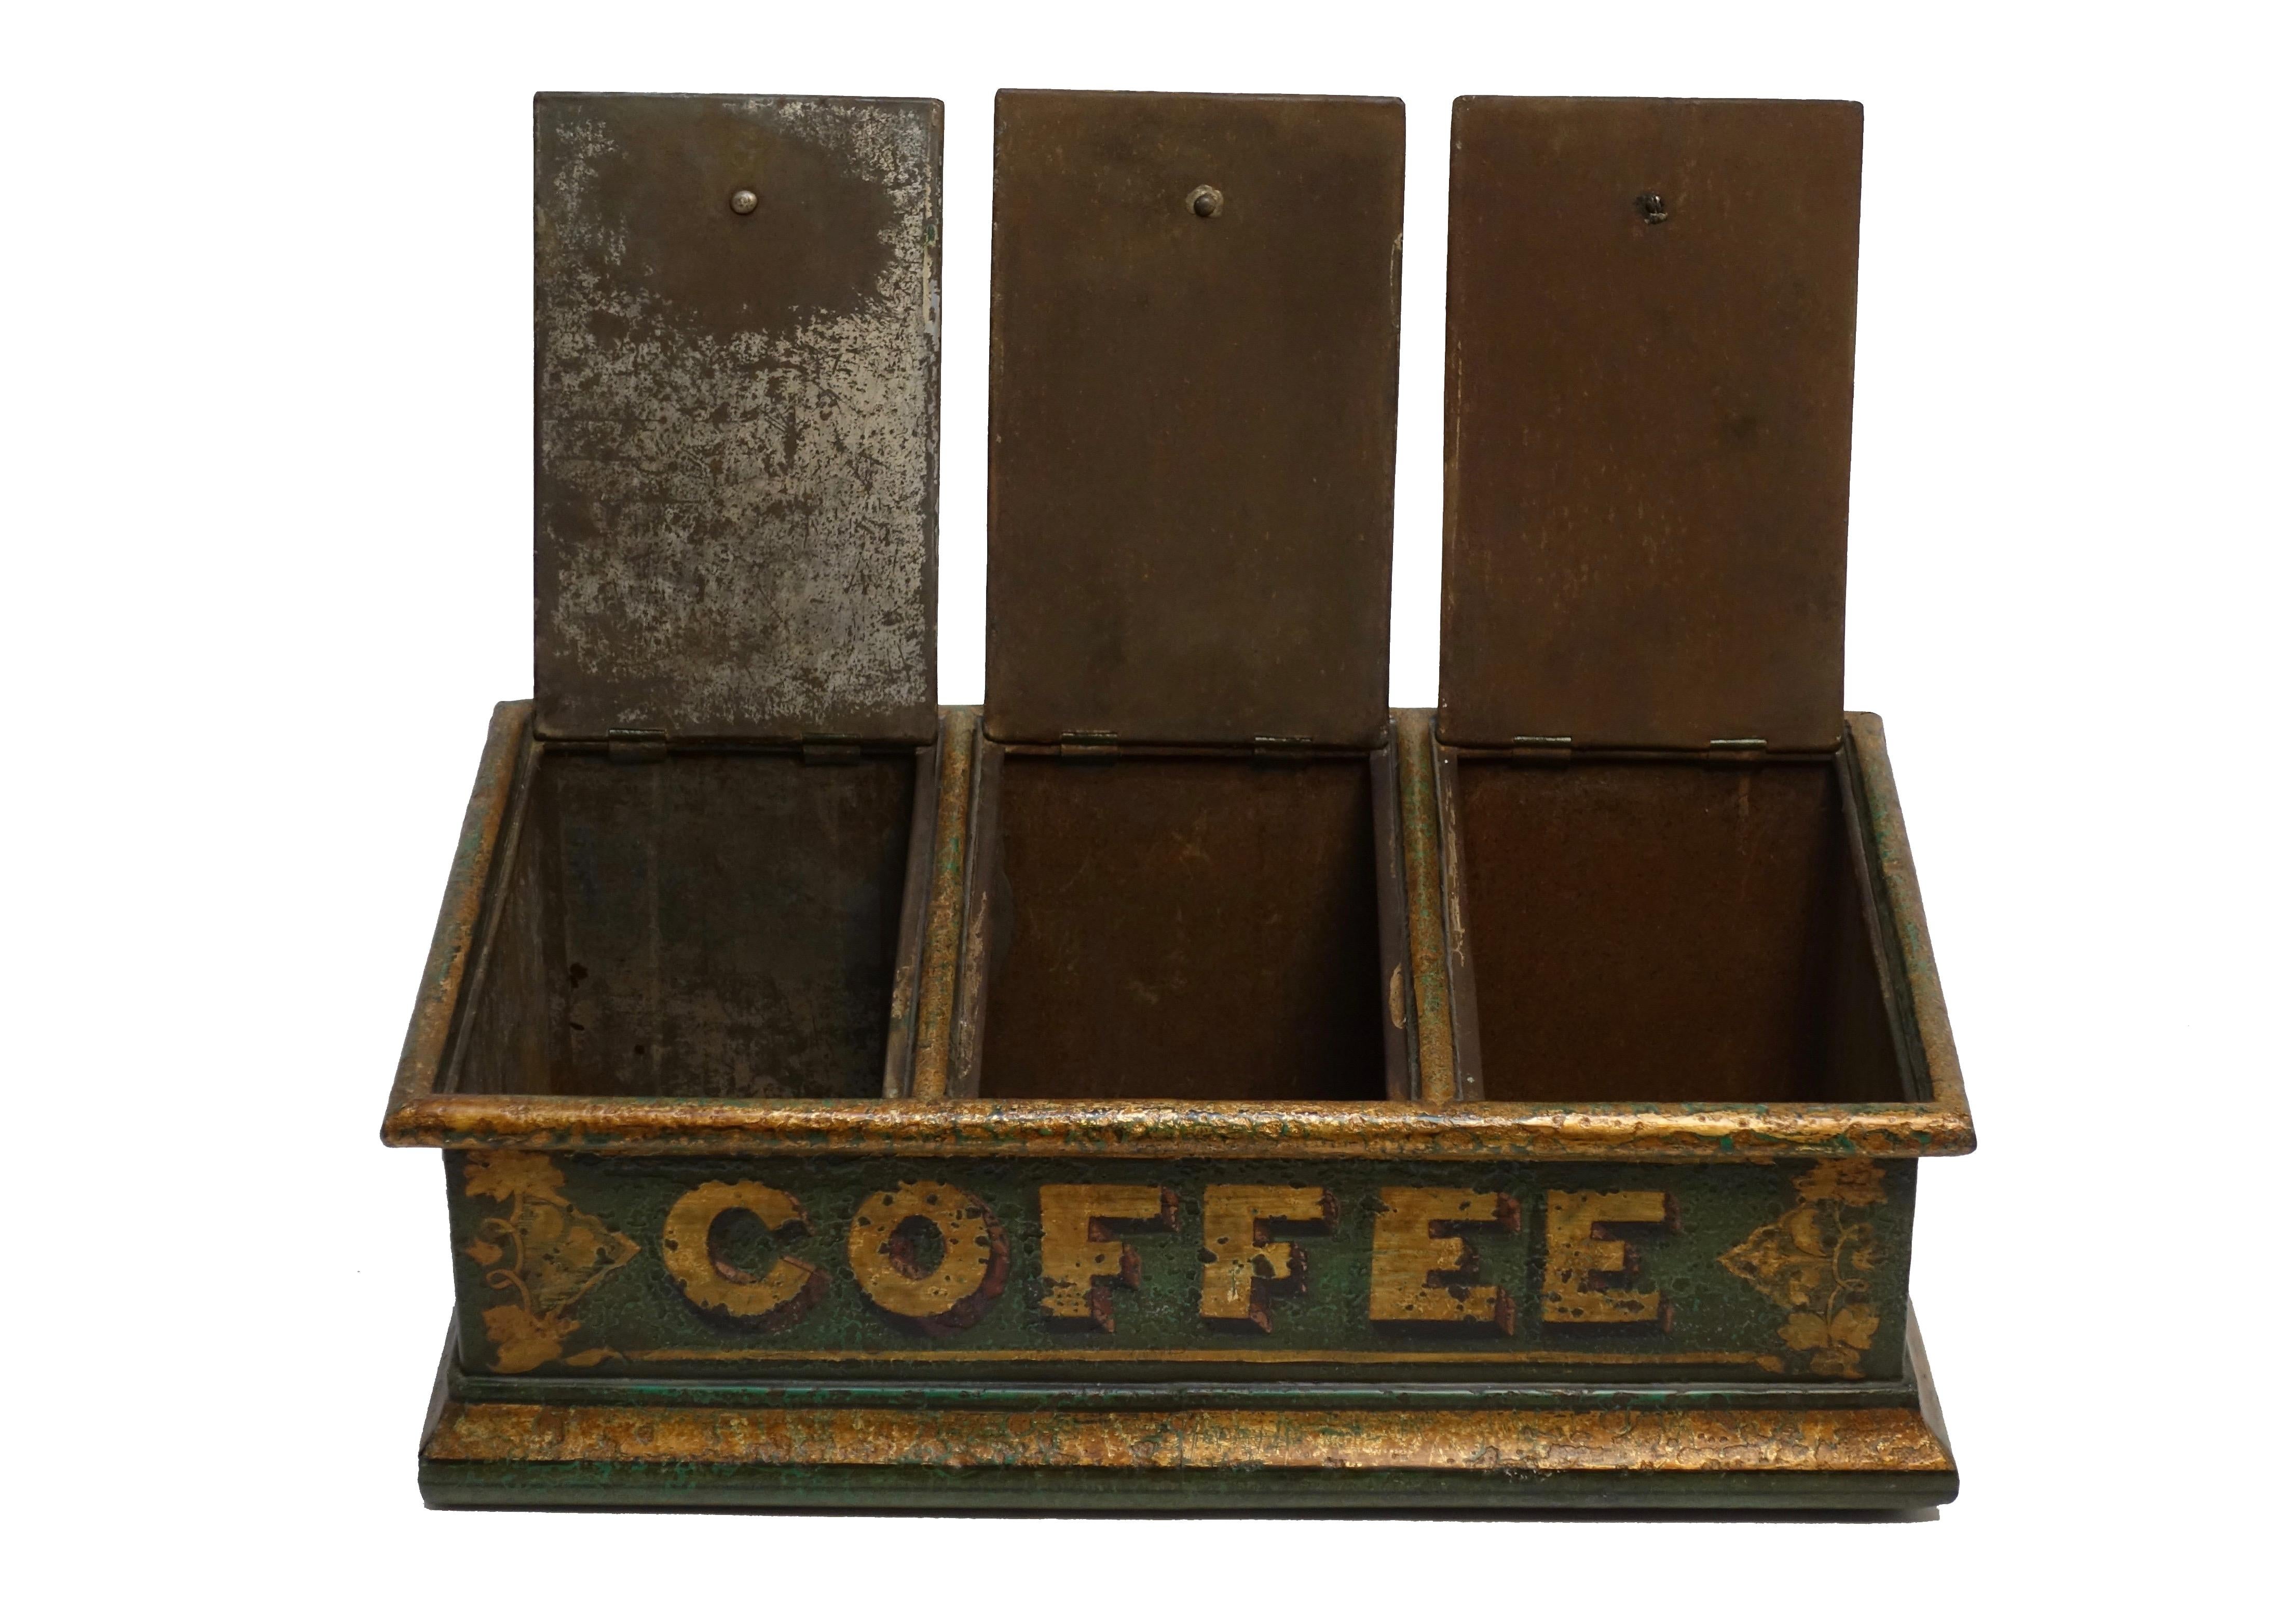 English Green Tole Painted Coffee Bin Store Display Dispenser, England, 19th Century